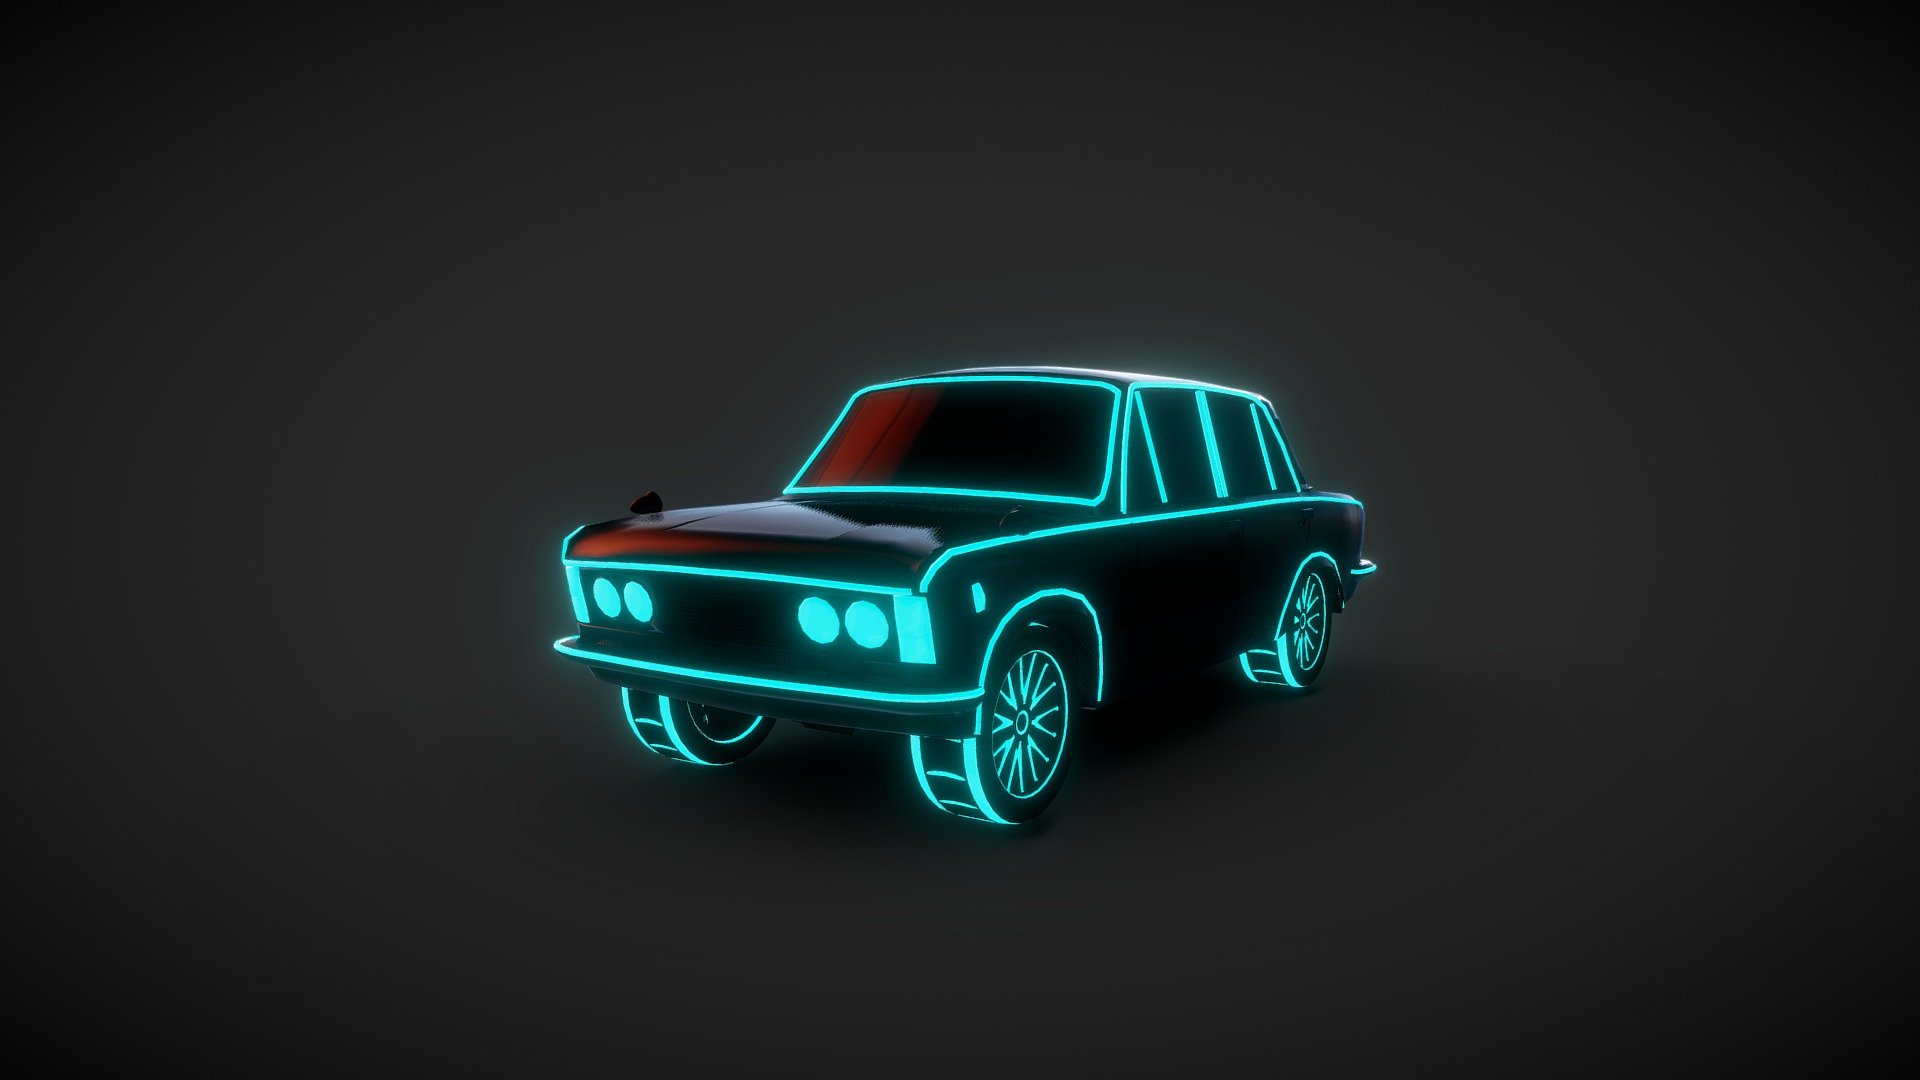 Car model made for Electro Ride game http://electroridegame.com You can add game to your Whishlist now! https://store.steampowered.com/app/696150 We are going to PC and Nintendo Switch! Stay tuned! Code &amp; Design: Sylwester Osik Graphics: Robert i Wojciech Miedziocha Music: Maciej Kulesza - Electro Ride car F 125p - 3D model by wojciechmiedziocha 3d model